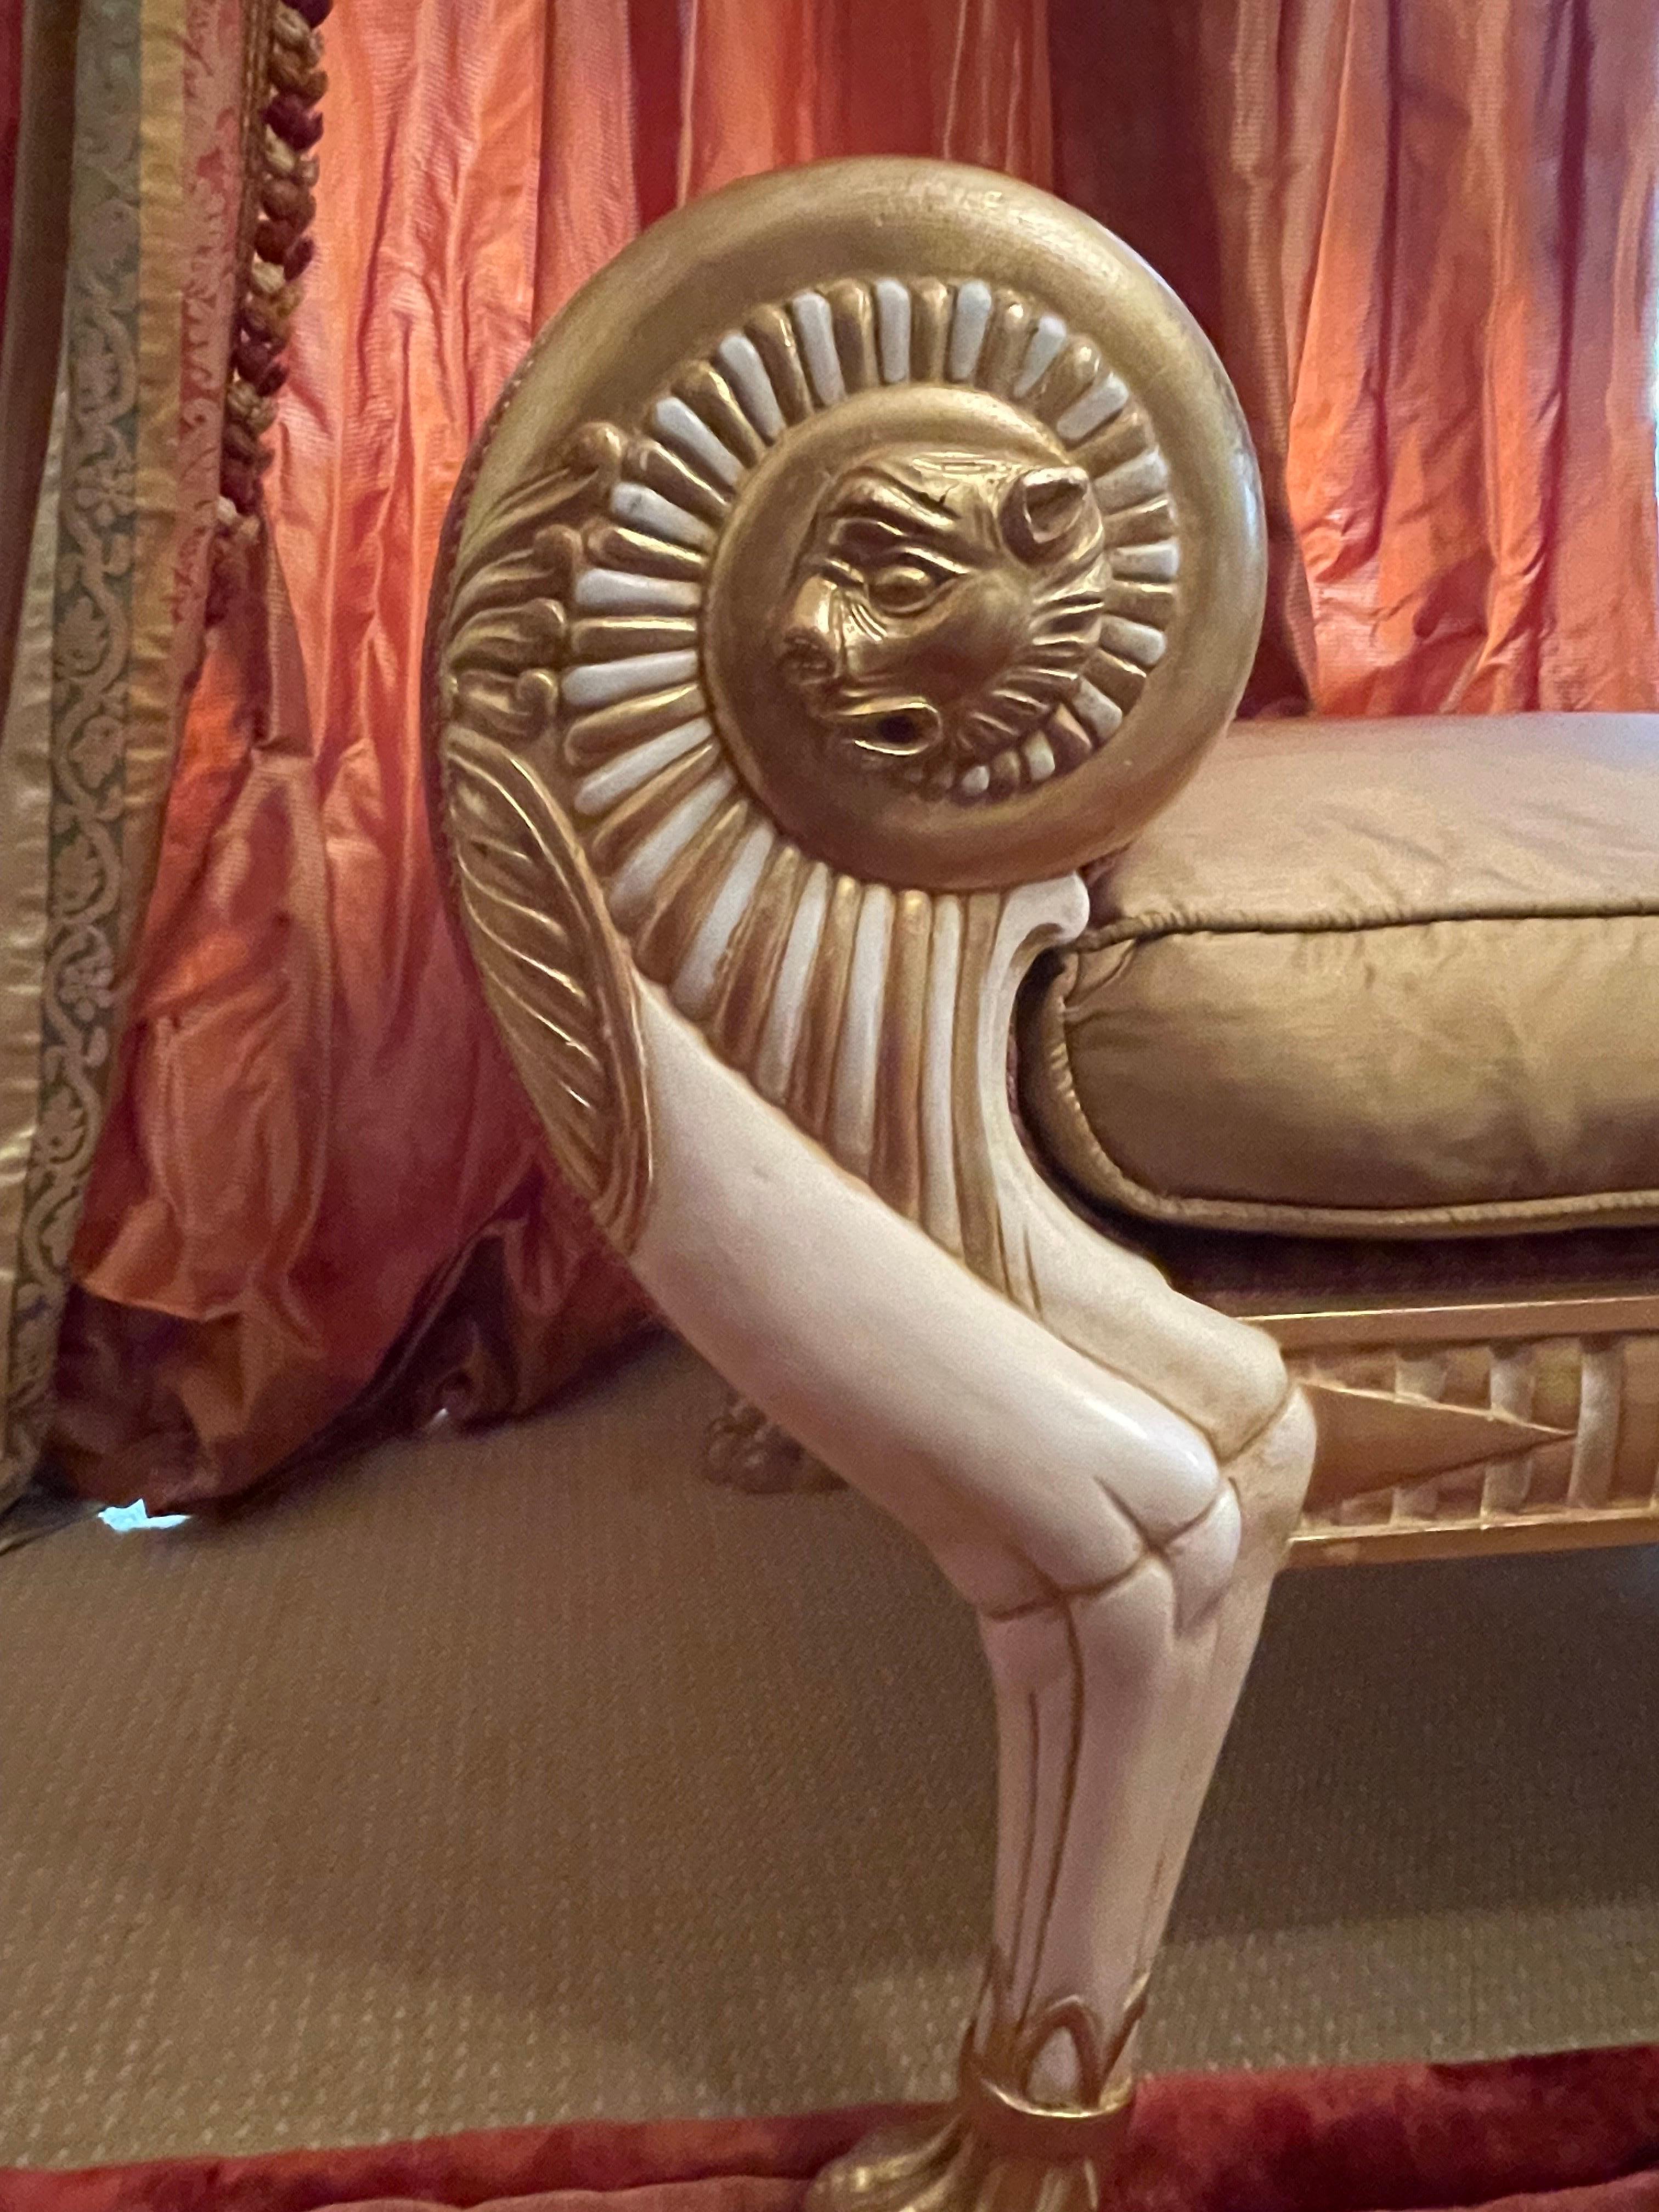 Italian Chaise Longue .Elegant and Timeless. Beautiful Reds and Gold Colors in Silk .